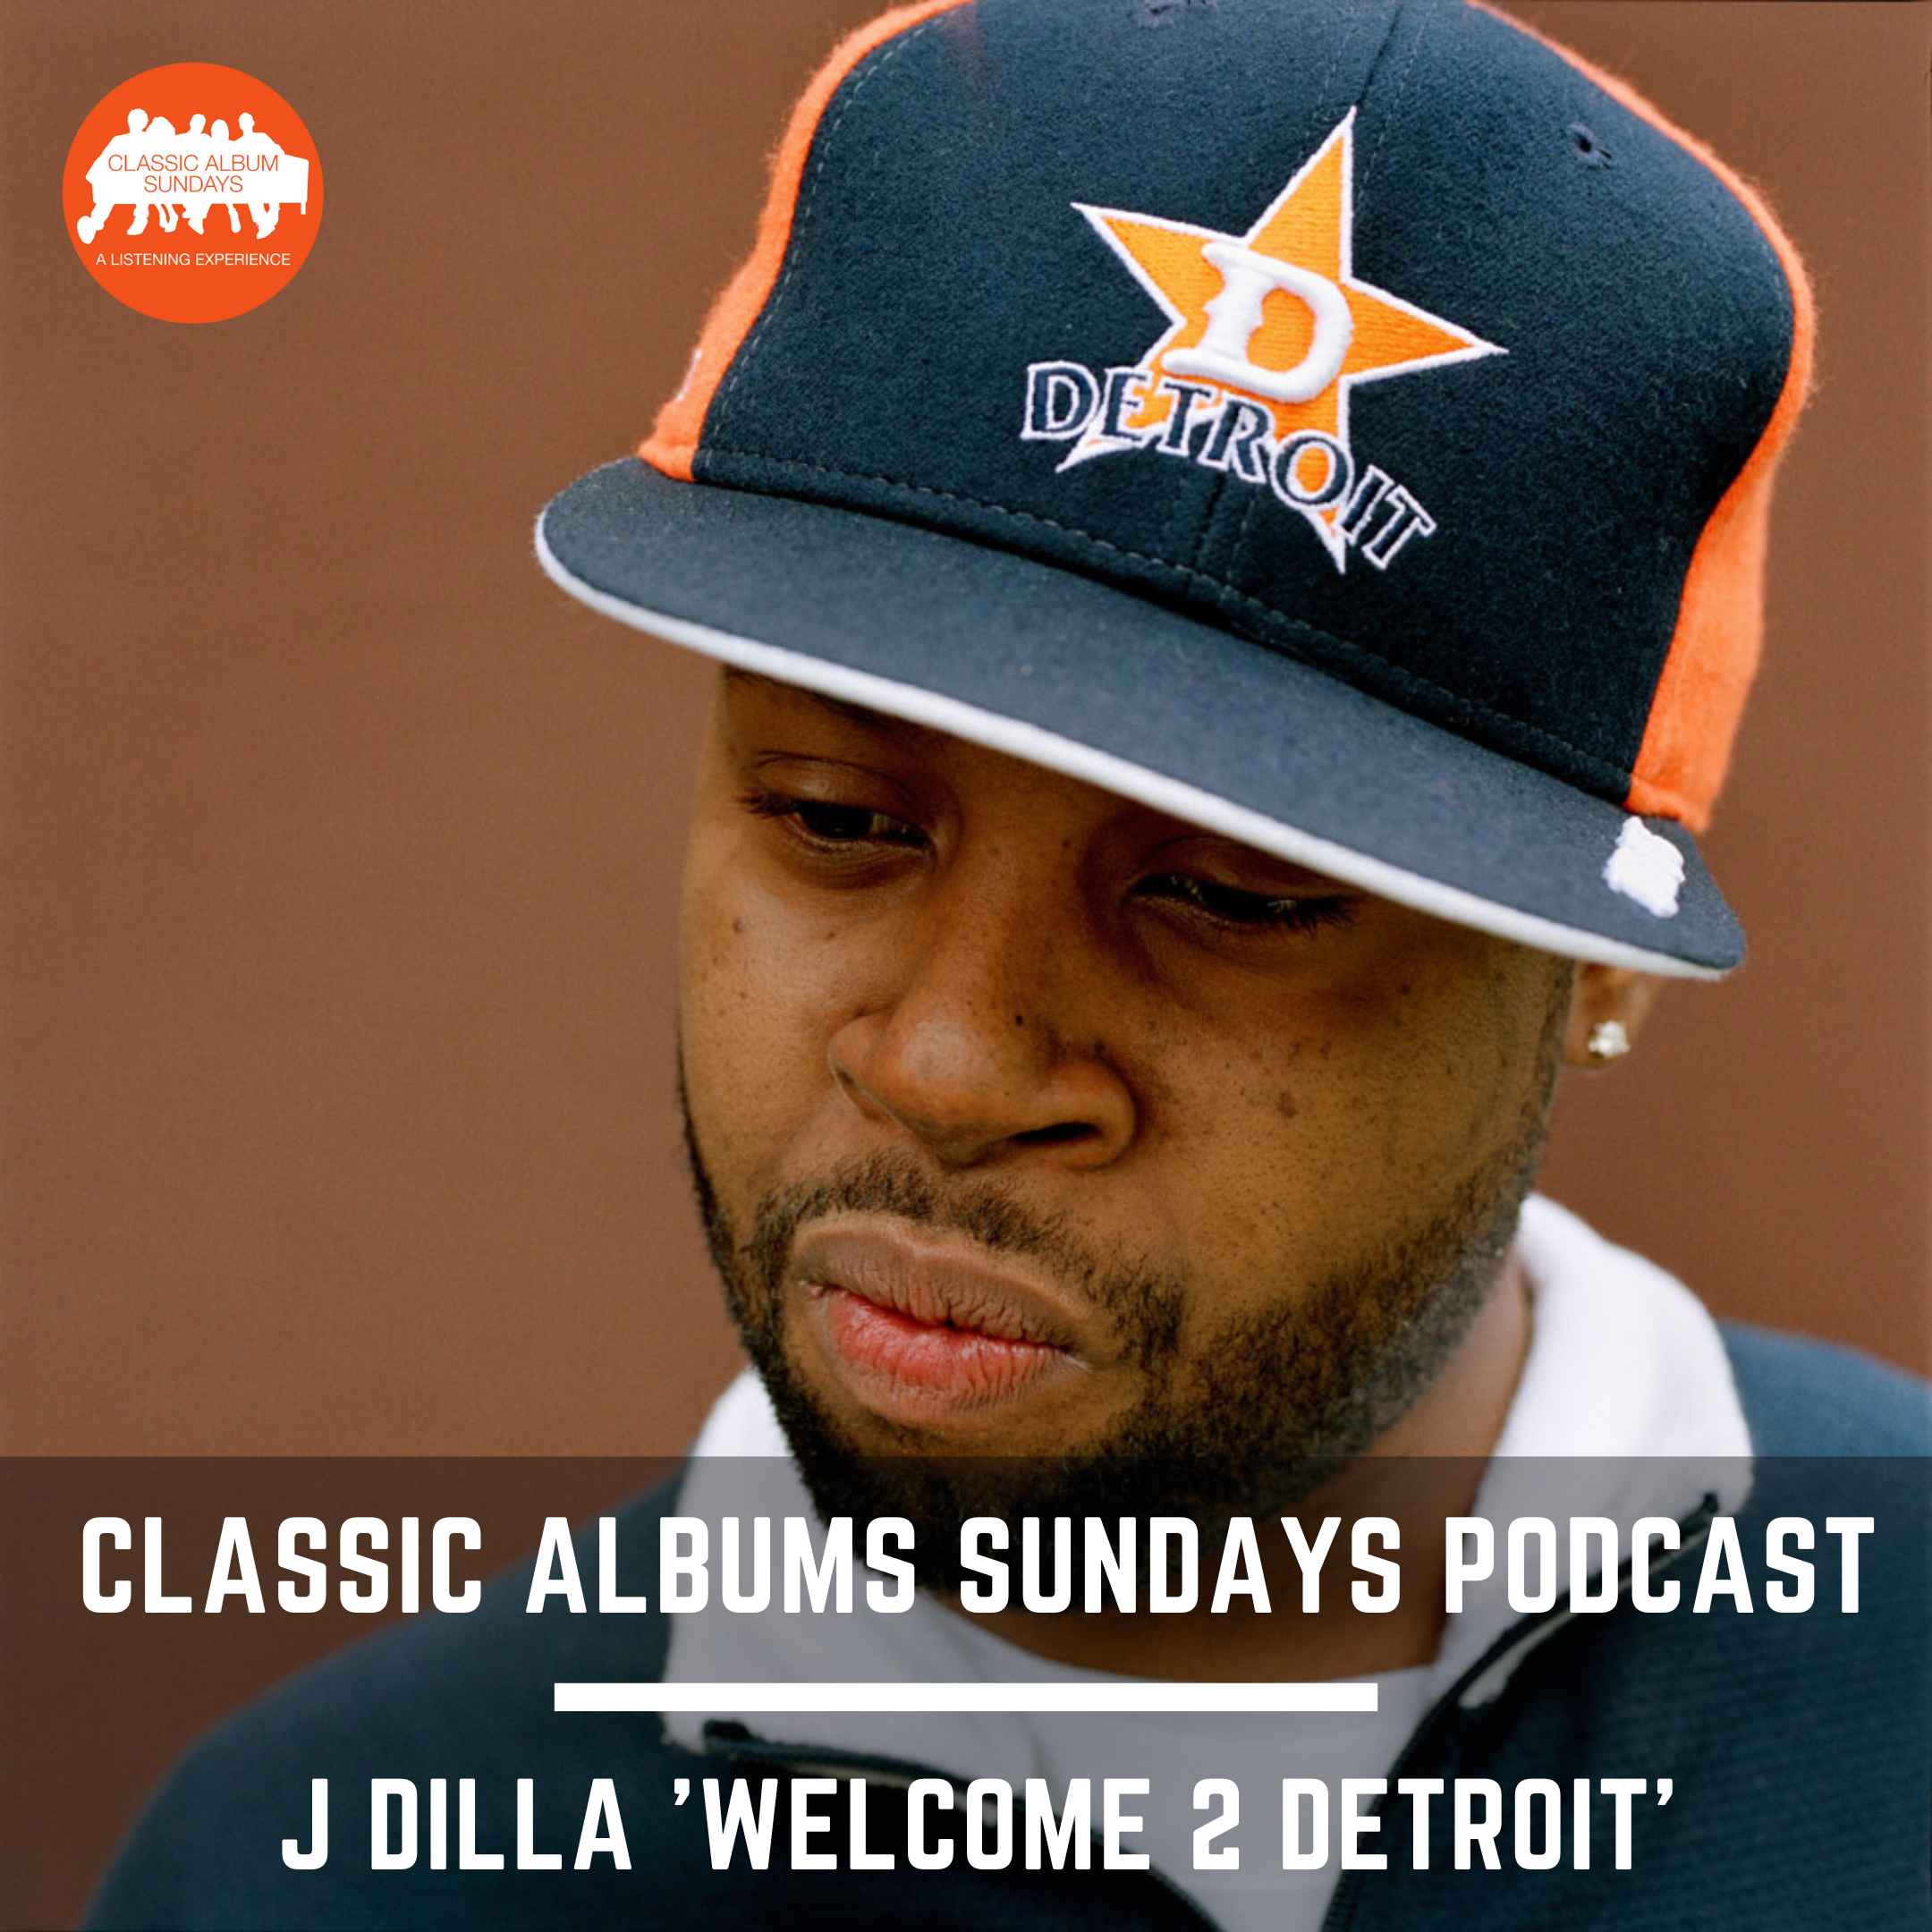 Classic Album Sundays Podcast: J Dilla ’Welcome 2 Detroit’ with Amp Fiddler